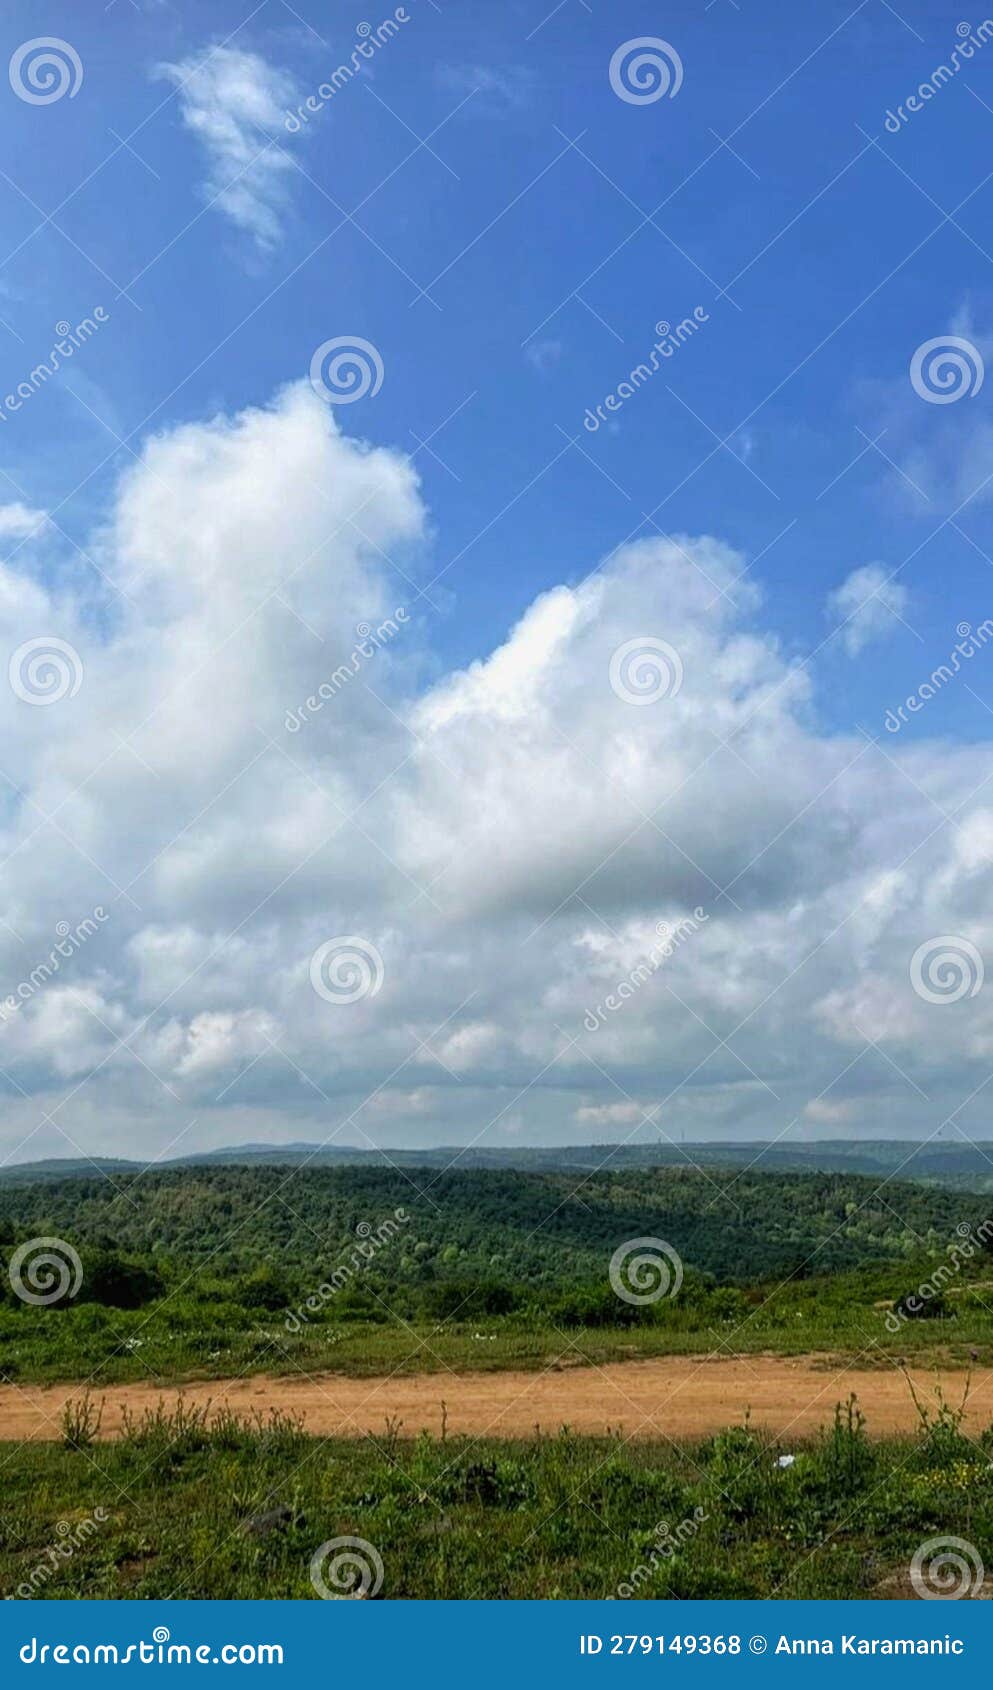 tÃ¼rkiye. valley of trees with a path against a blue sky with clouds.